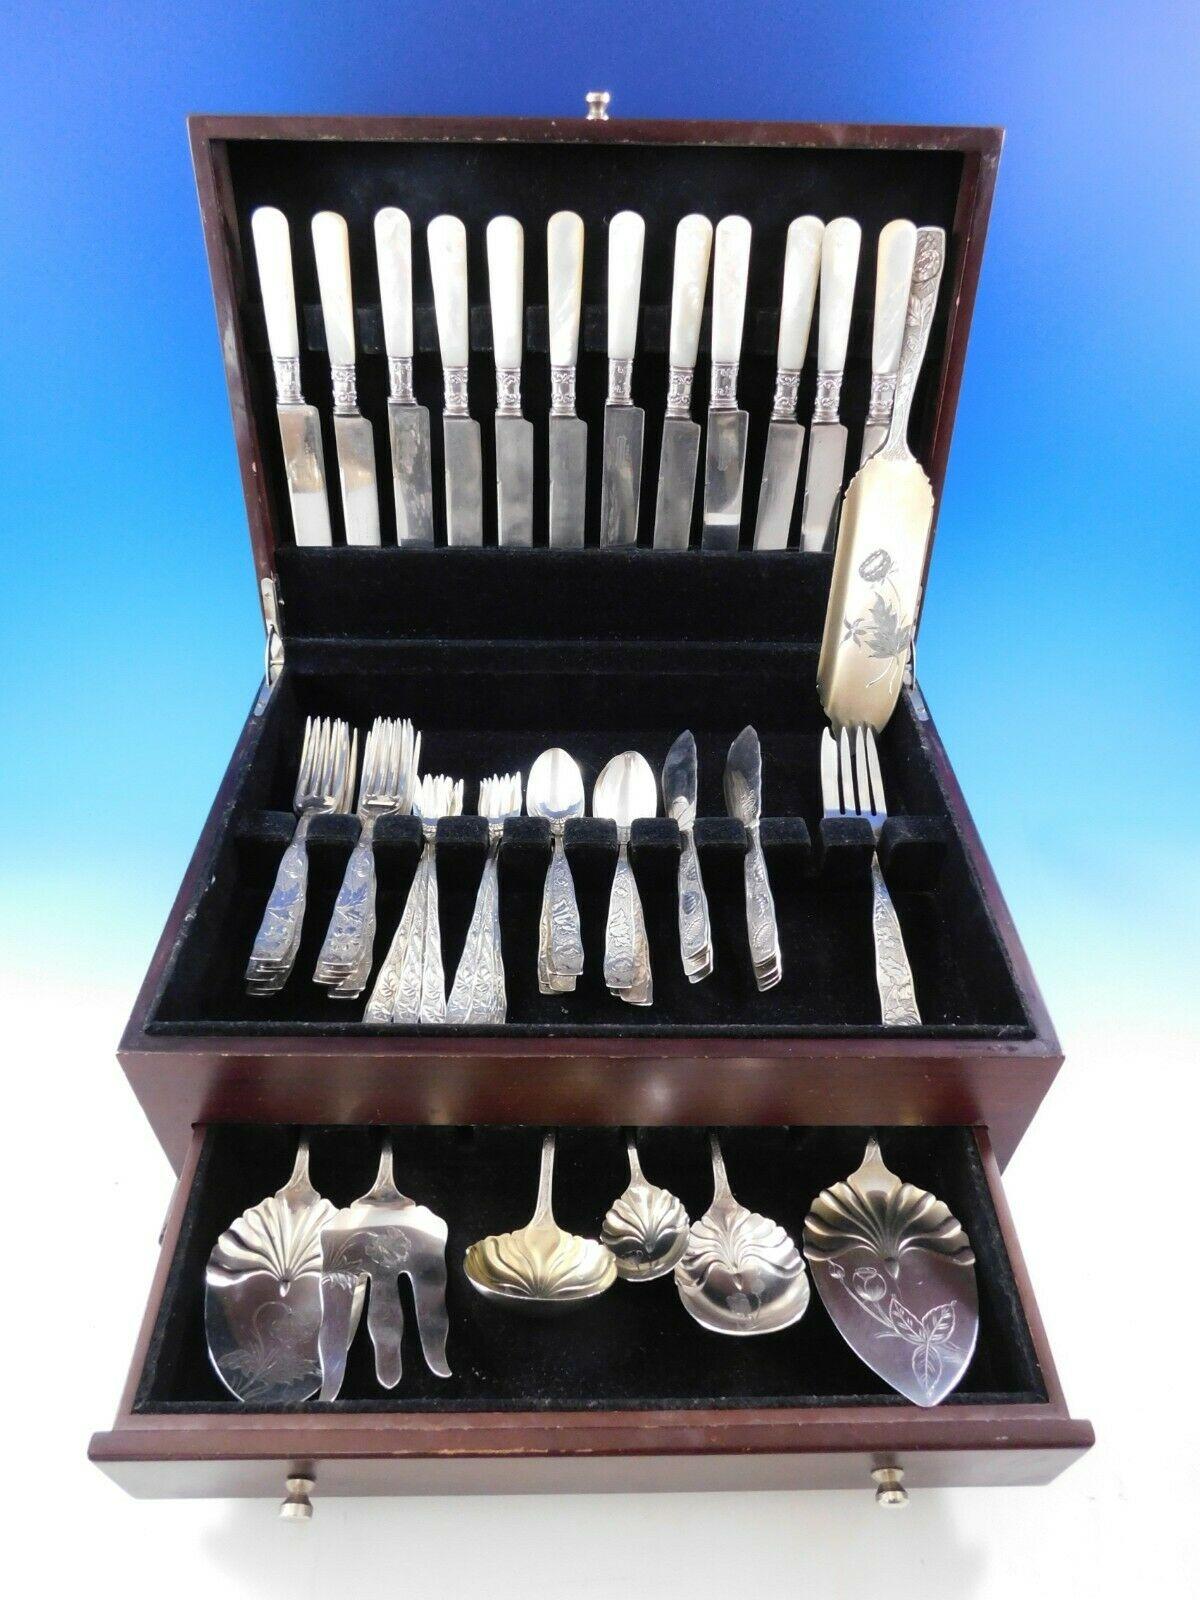 Scarce Orchids by Towle multi-motif sterling silver flatware set, 68 pieces (including Mother of Pearl knives). First introduced in 1887, this multi-motif pattern displays a finely detailed varying floral motif on a unique textured swirl background.